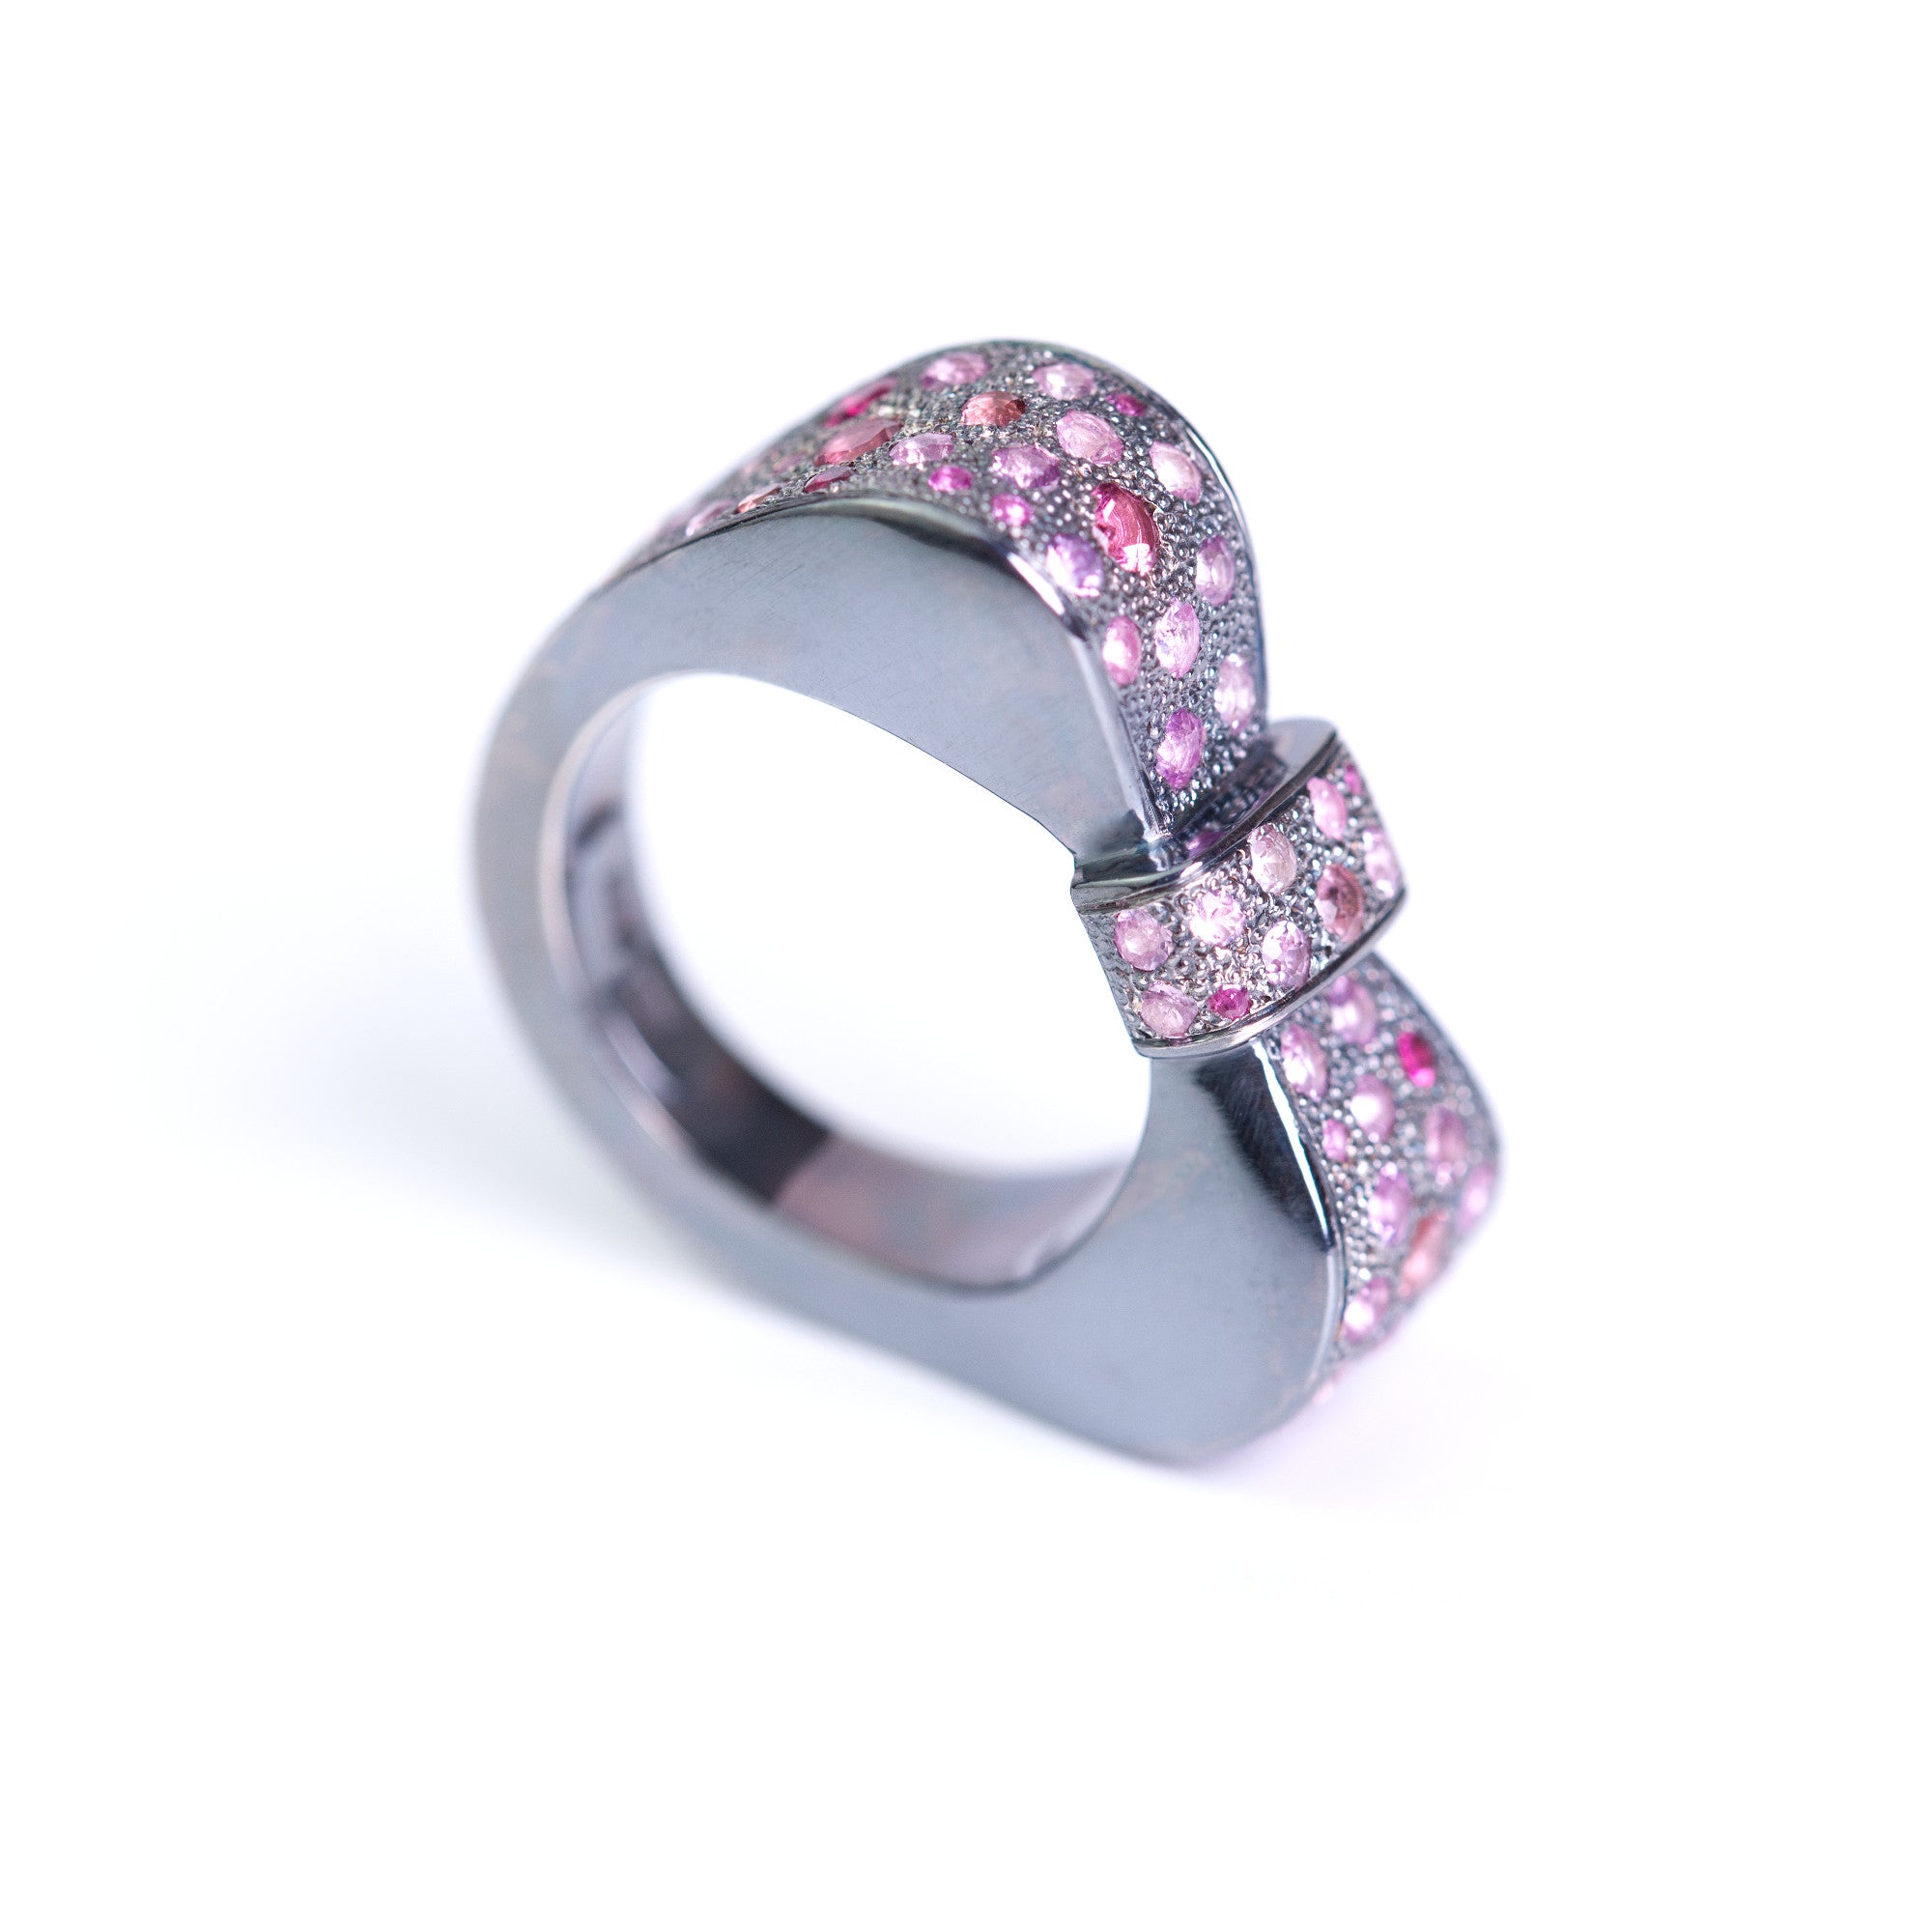 Art Deco Bow Ring with pink sapphires made by Ewa Z. Sleziona Jewellery